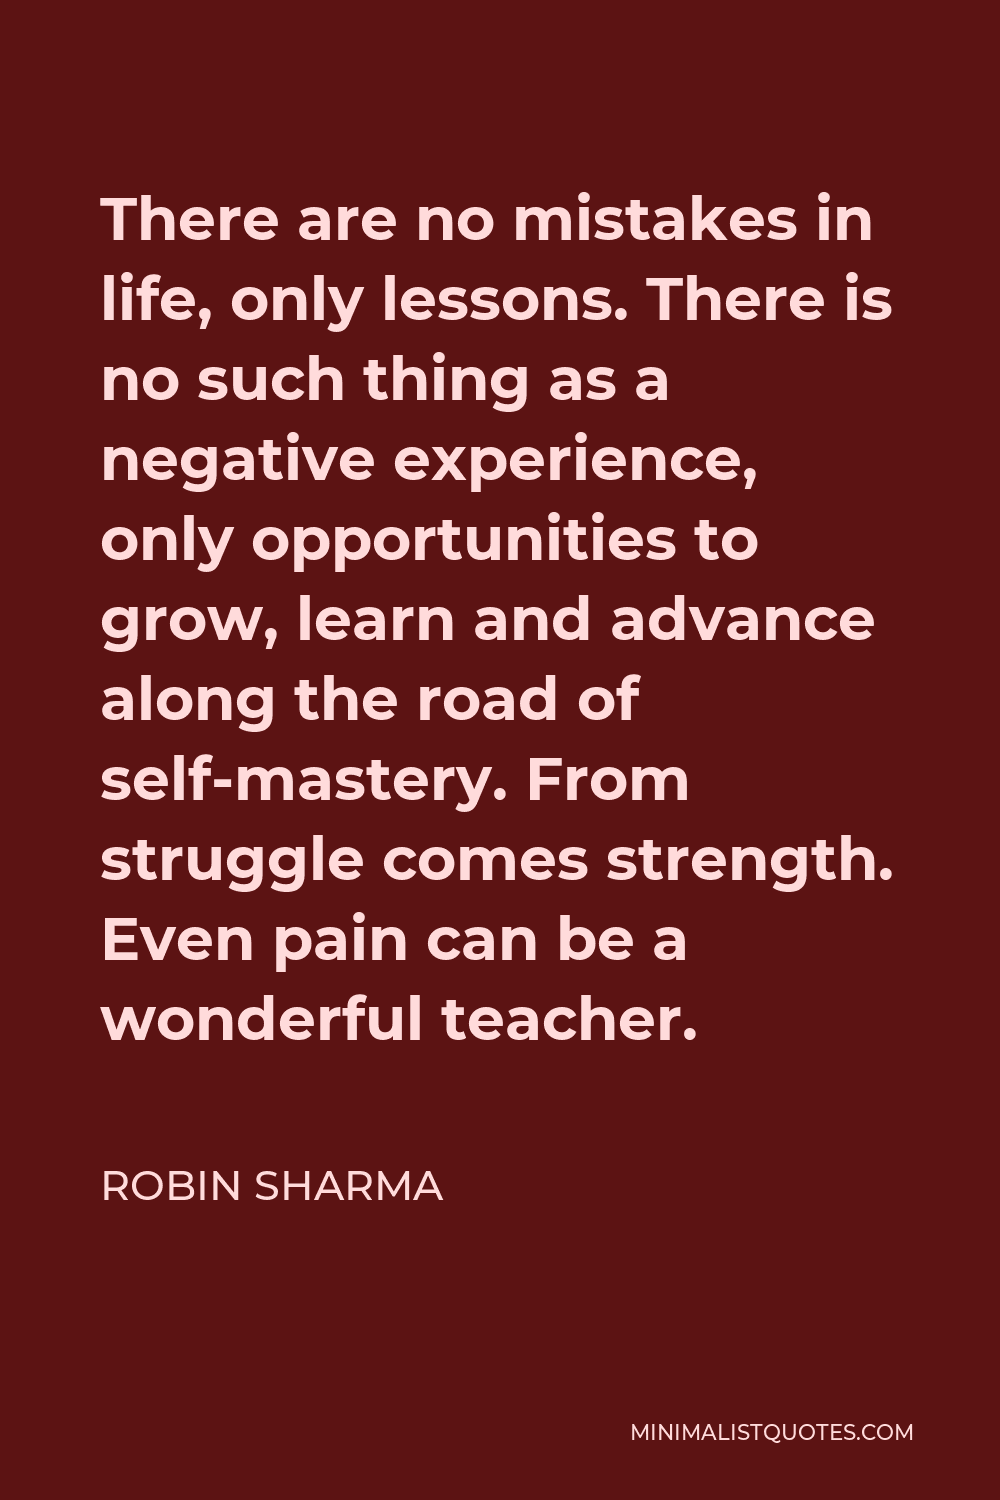 Robin Sharma Quote - There are no mistakes in life, only lessons. There is no such thing as a negative experience, only opportunities to grow, learn and advance along the road of self-mastery. From struggle comes strength. Even pain can be a wonderful teacher.